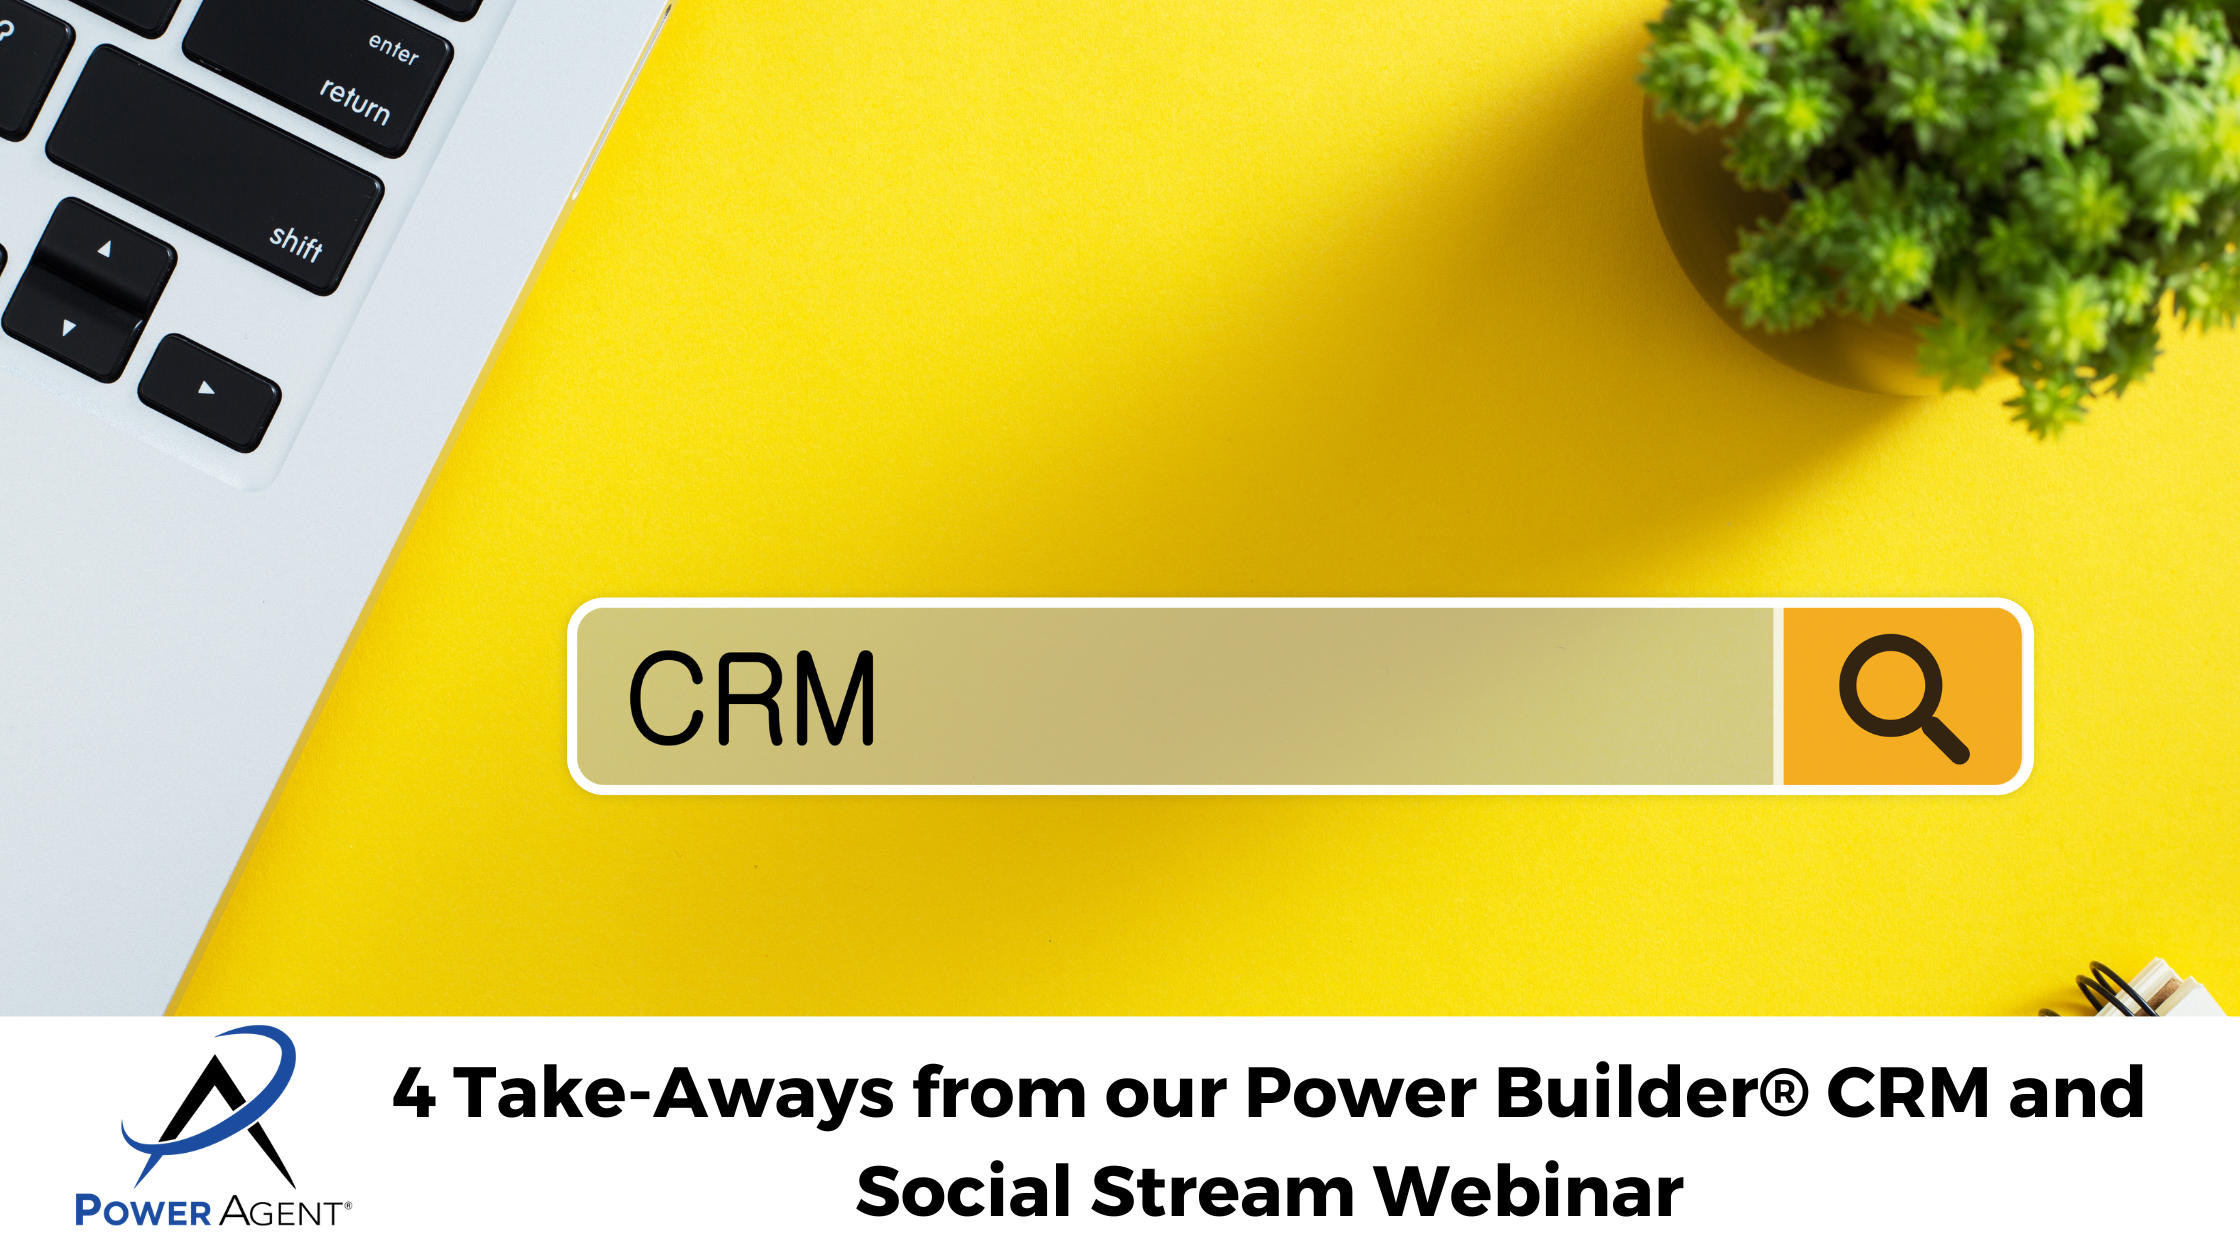 4 Take-Aways from our Power Builder® CRM and Social Stream Webinar